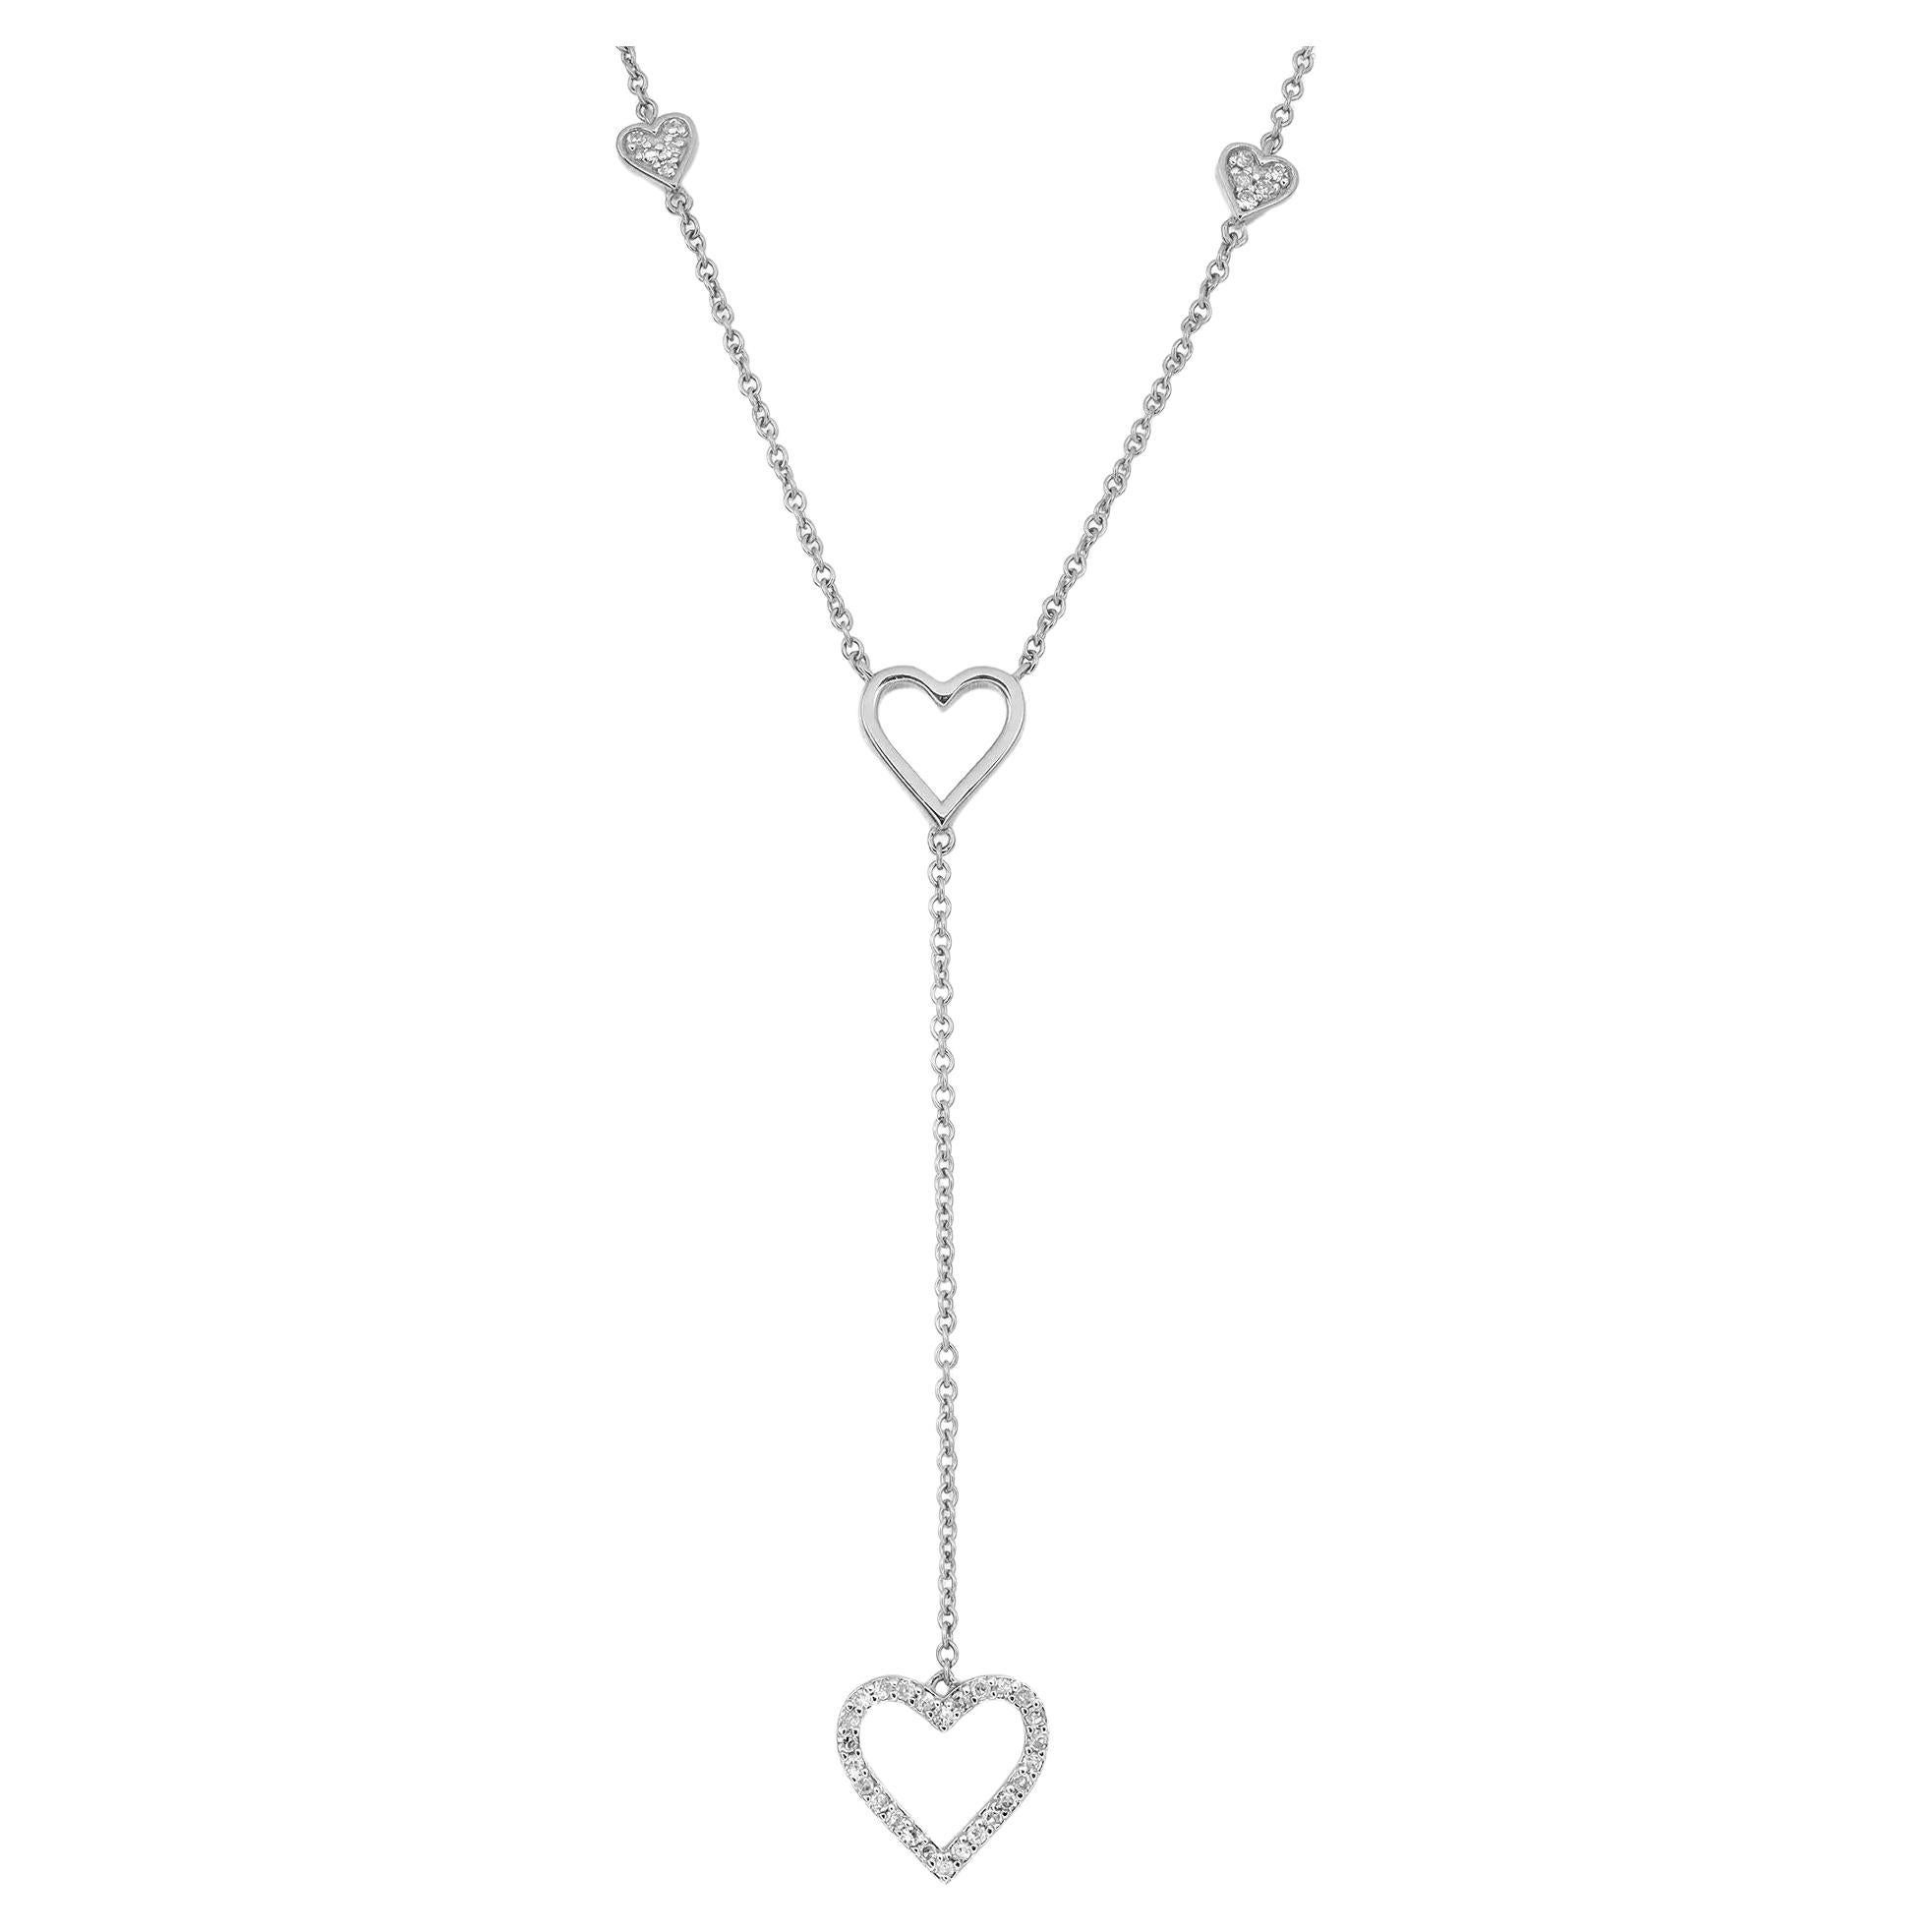 Diamond Heart Lariat Necklace Round Cut 14K White Gold 0.14Cttw For Sale